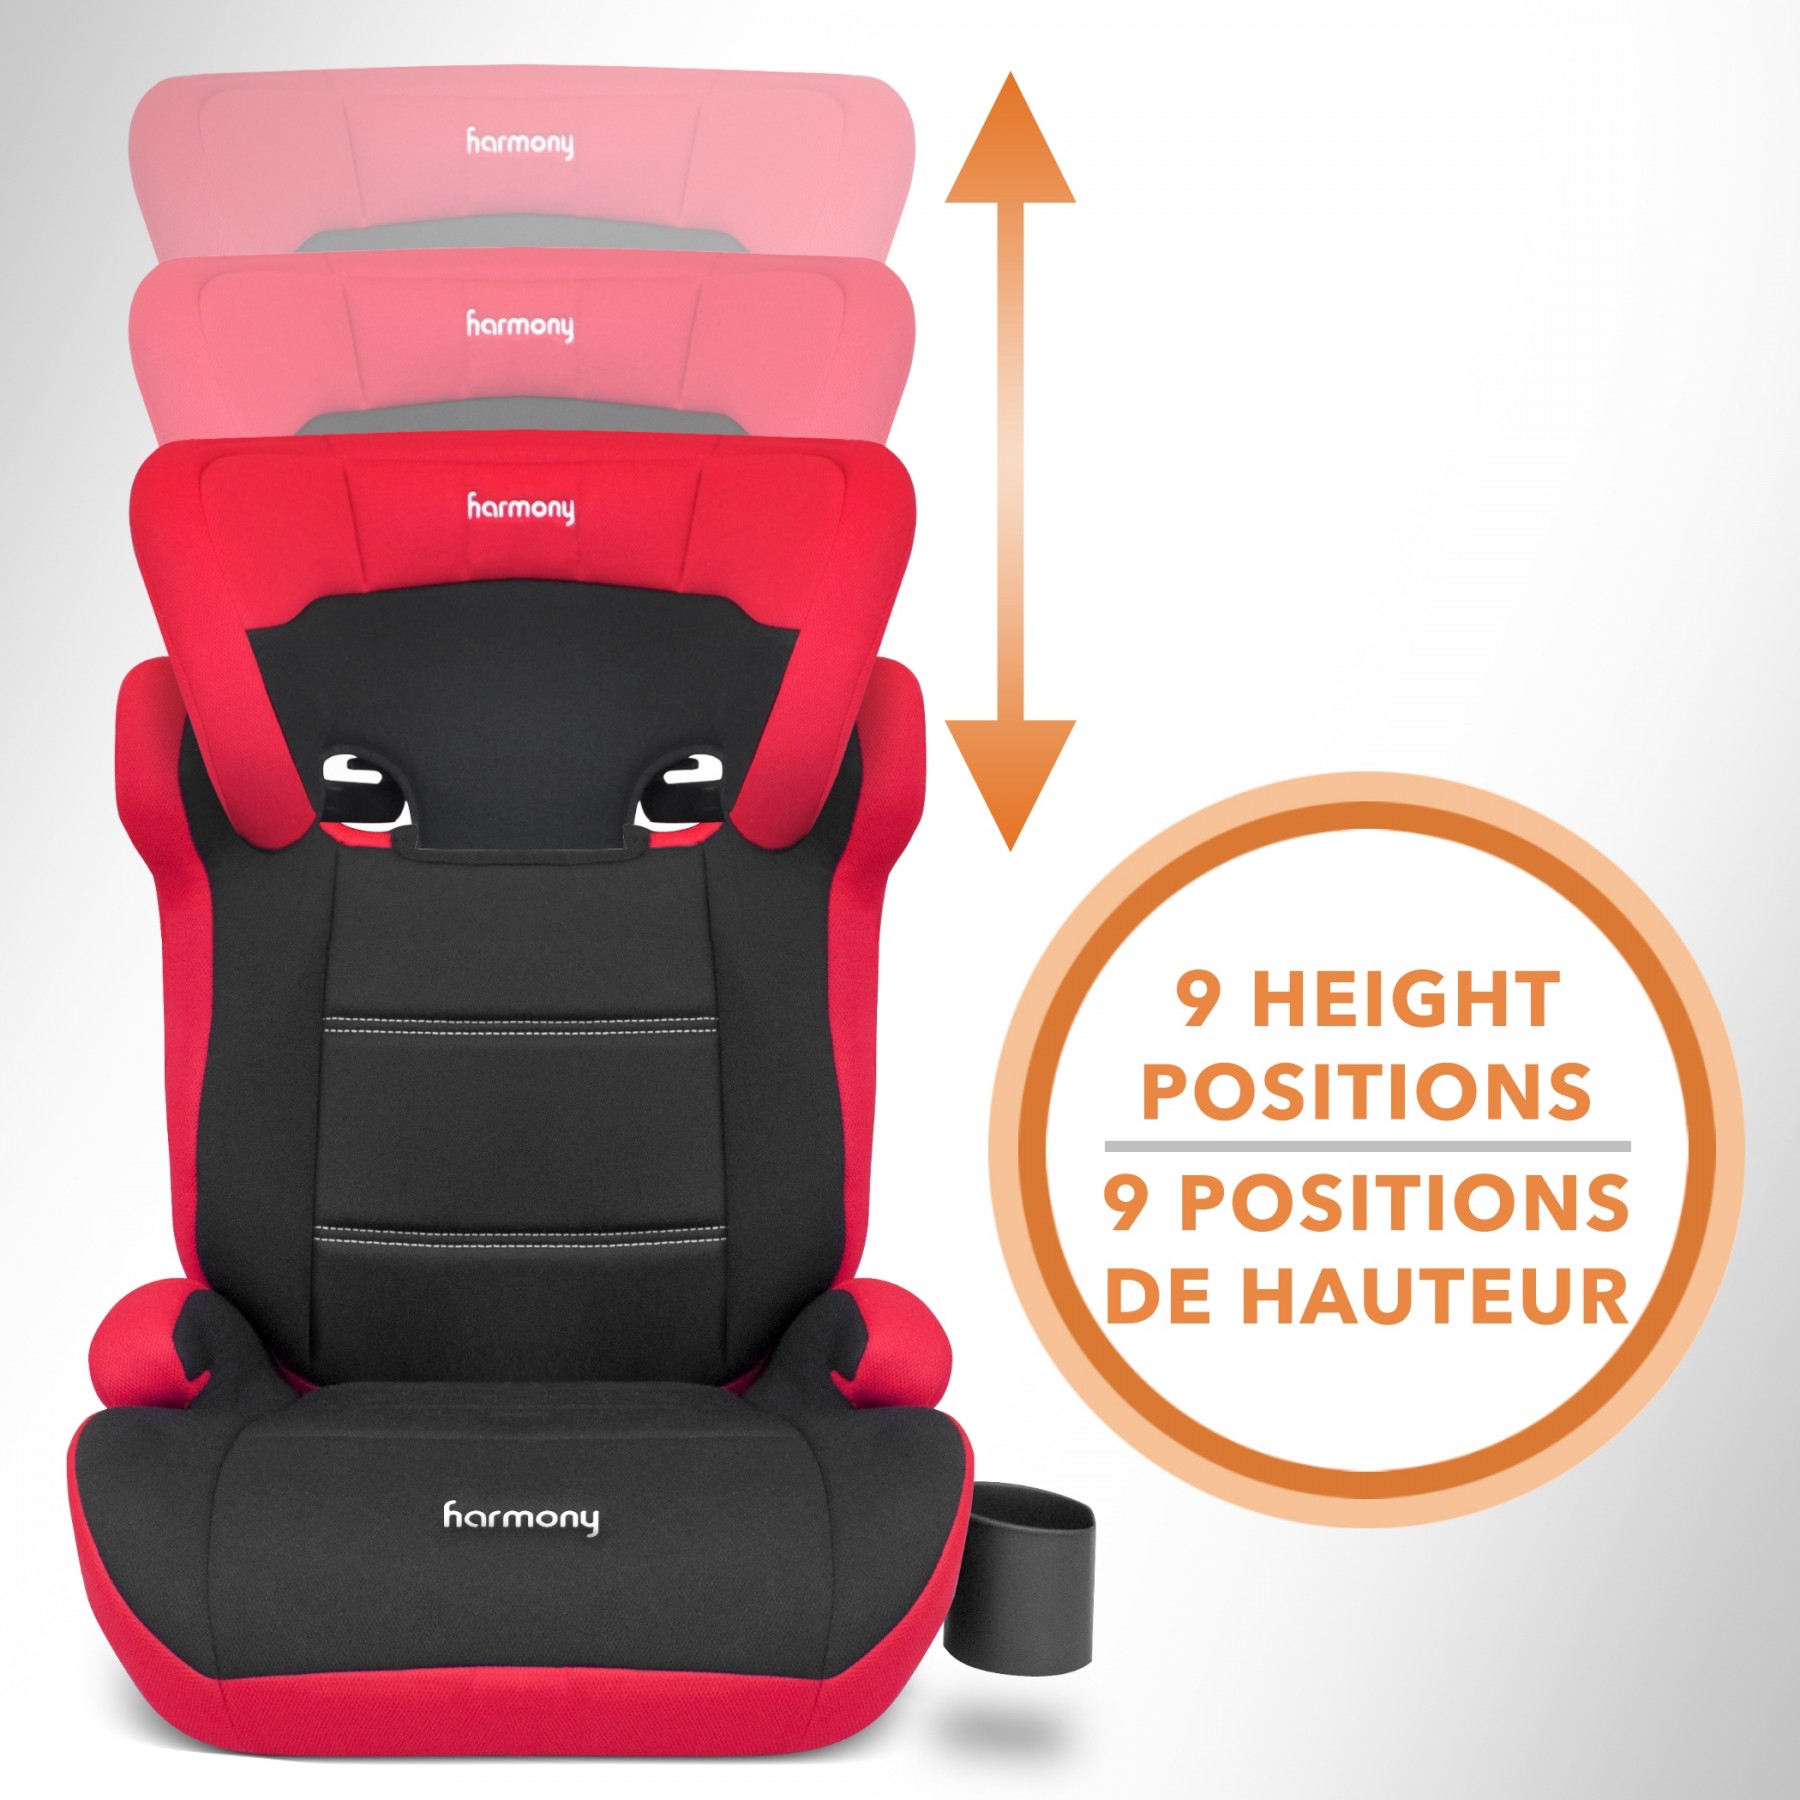 Dreamtime MAX Booster Car Seat - Red and Black